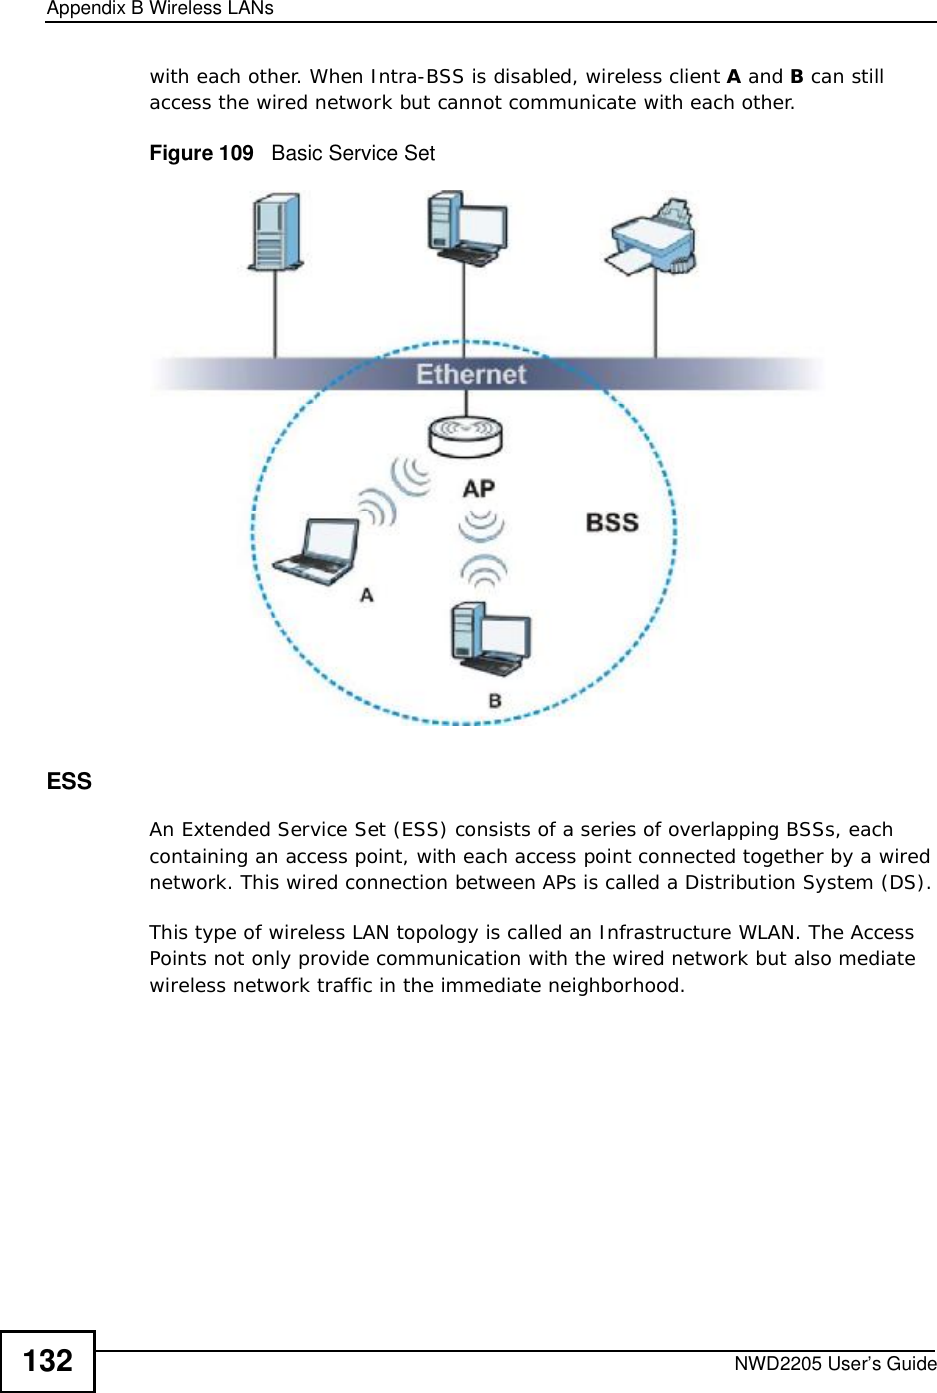 Appendix BWireless LANsNWD2205 User’s Guide132with each other. When Intra-BSS is disabled, wireless client A and B can still access the wired network but cannot communicate with each other.Figure 109   Basic Service SetESSAn Extended Service Set (ESS) consists of a series of overlapping BSSs, each containing an access point, with each access point connected together by a wired network. This wired connection between APs is called a Distribution System (DS).This type of wireless LAN topology is called an Infrastructure WLAN. The Access Points not only provide communication with the wired network but also mediate wireless network traffic in the immediate neighborhood. 